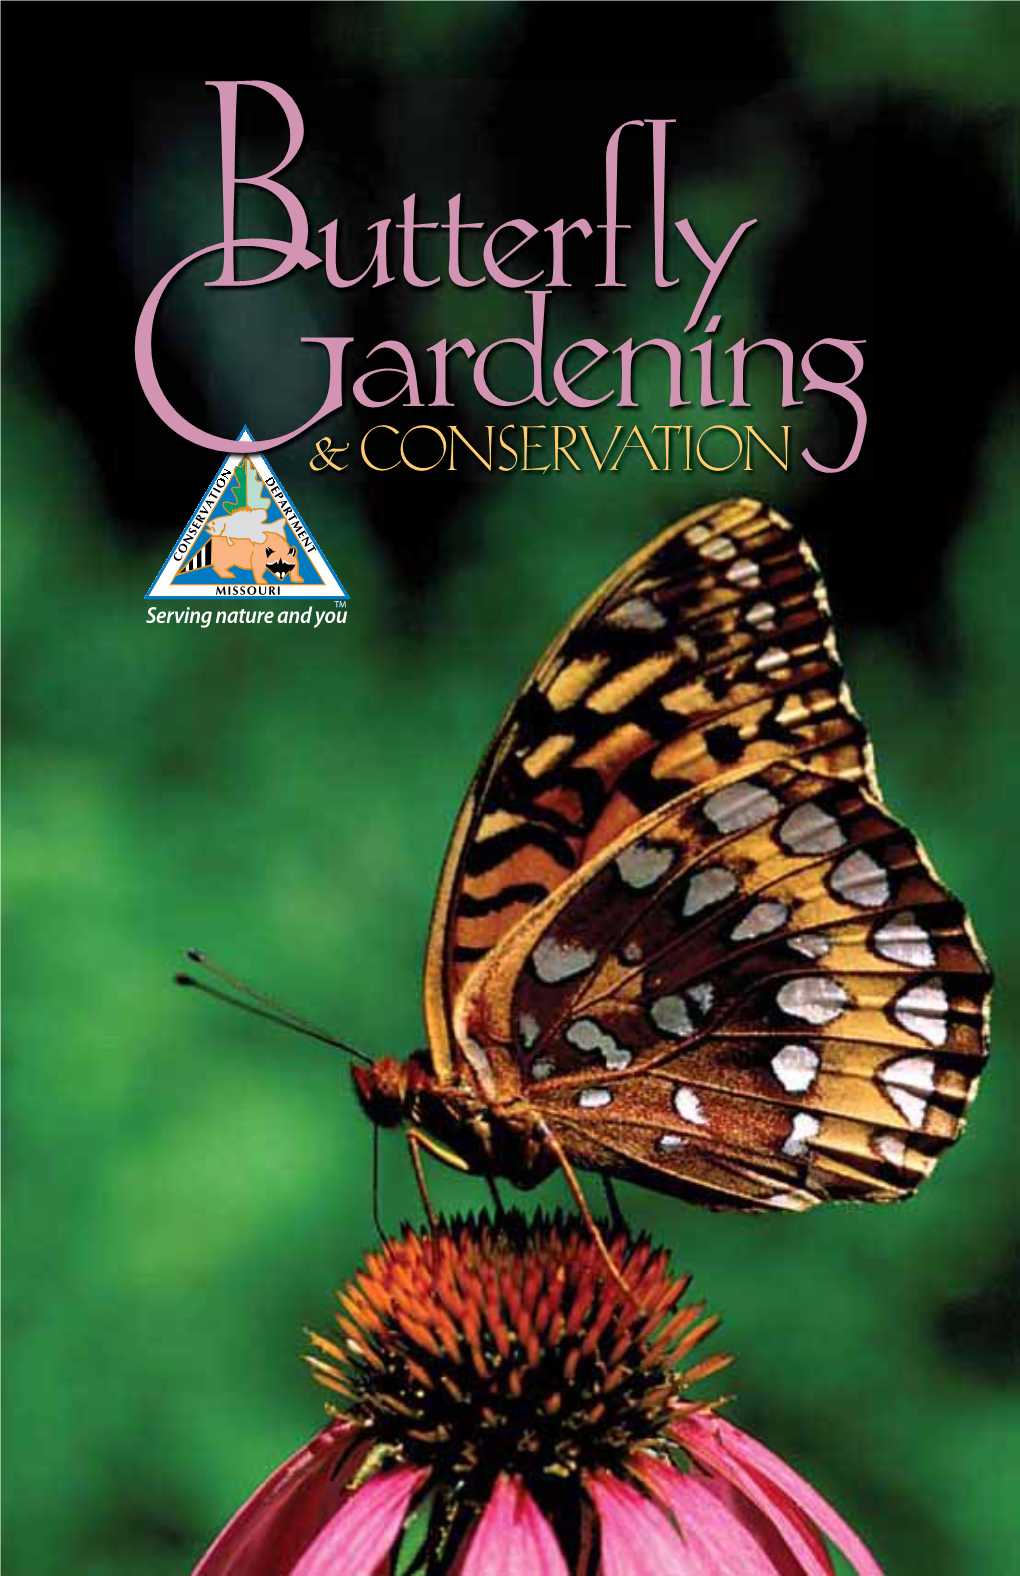 Butterfly Gardening & Conservation